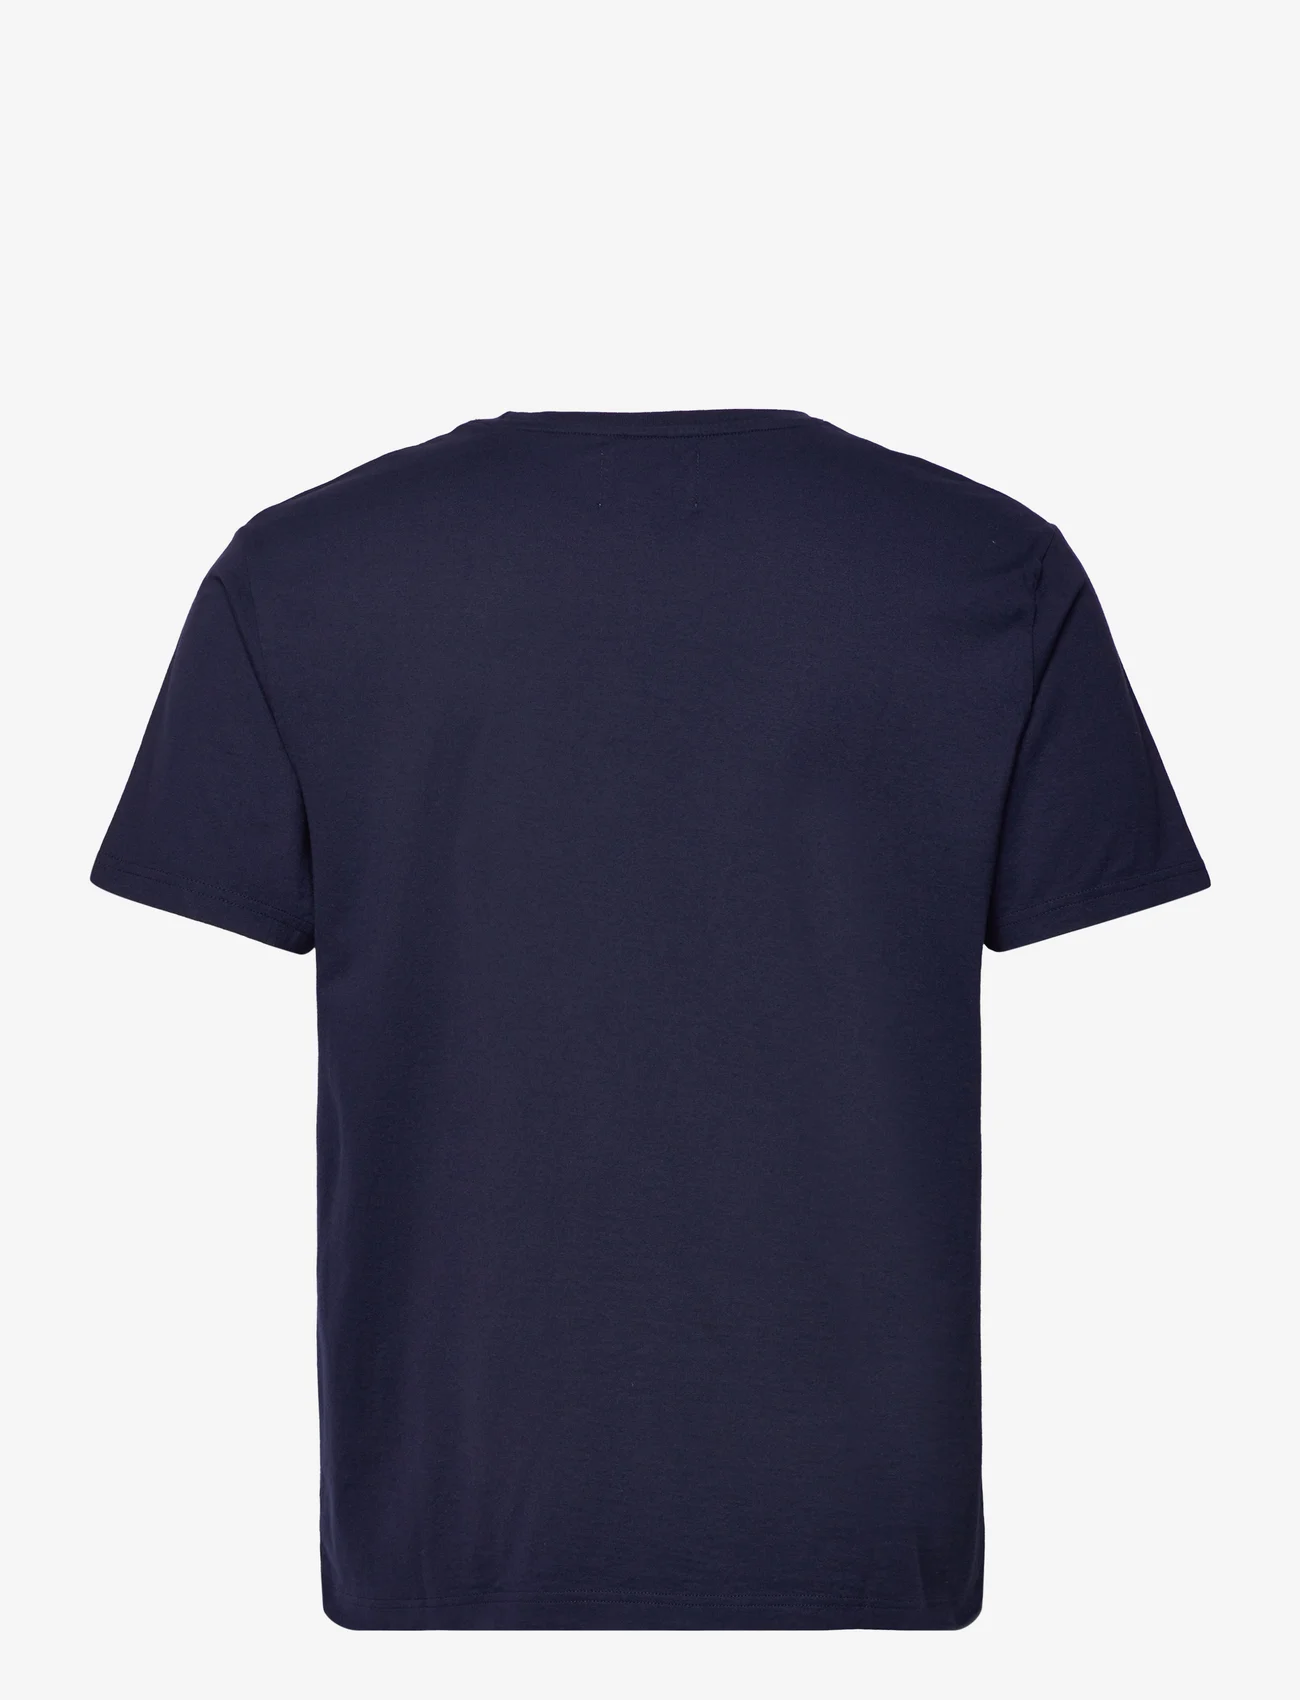 Double A by Wood Wood - Ace patches T-Shirt - basic t-shirts - navy - 1